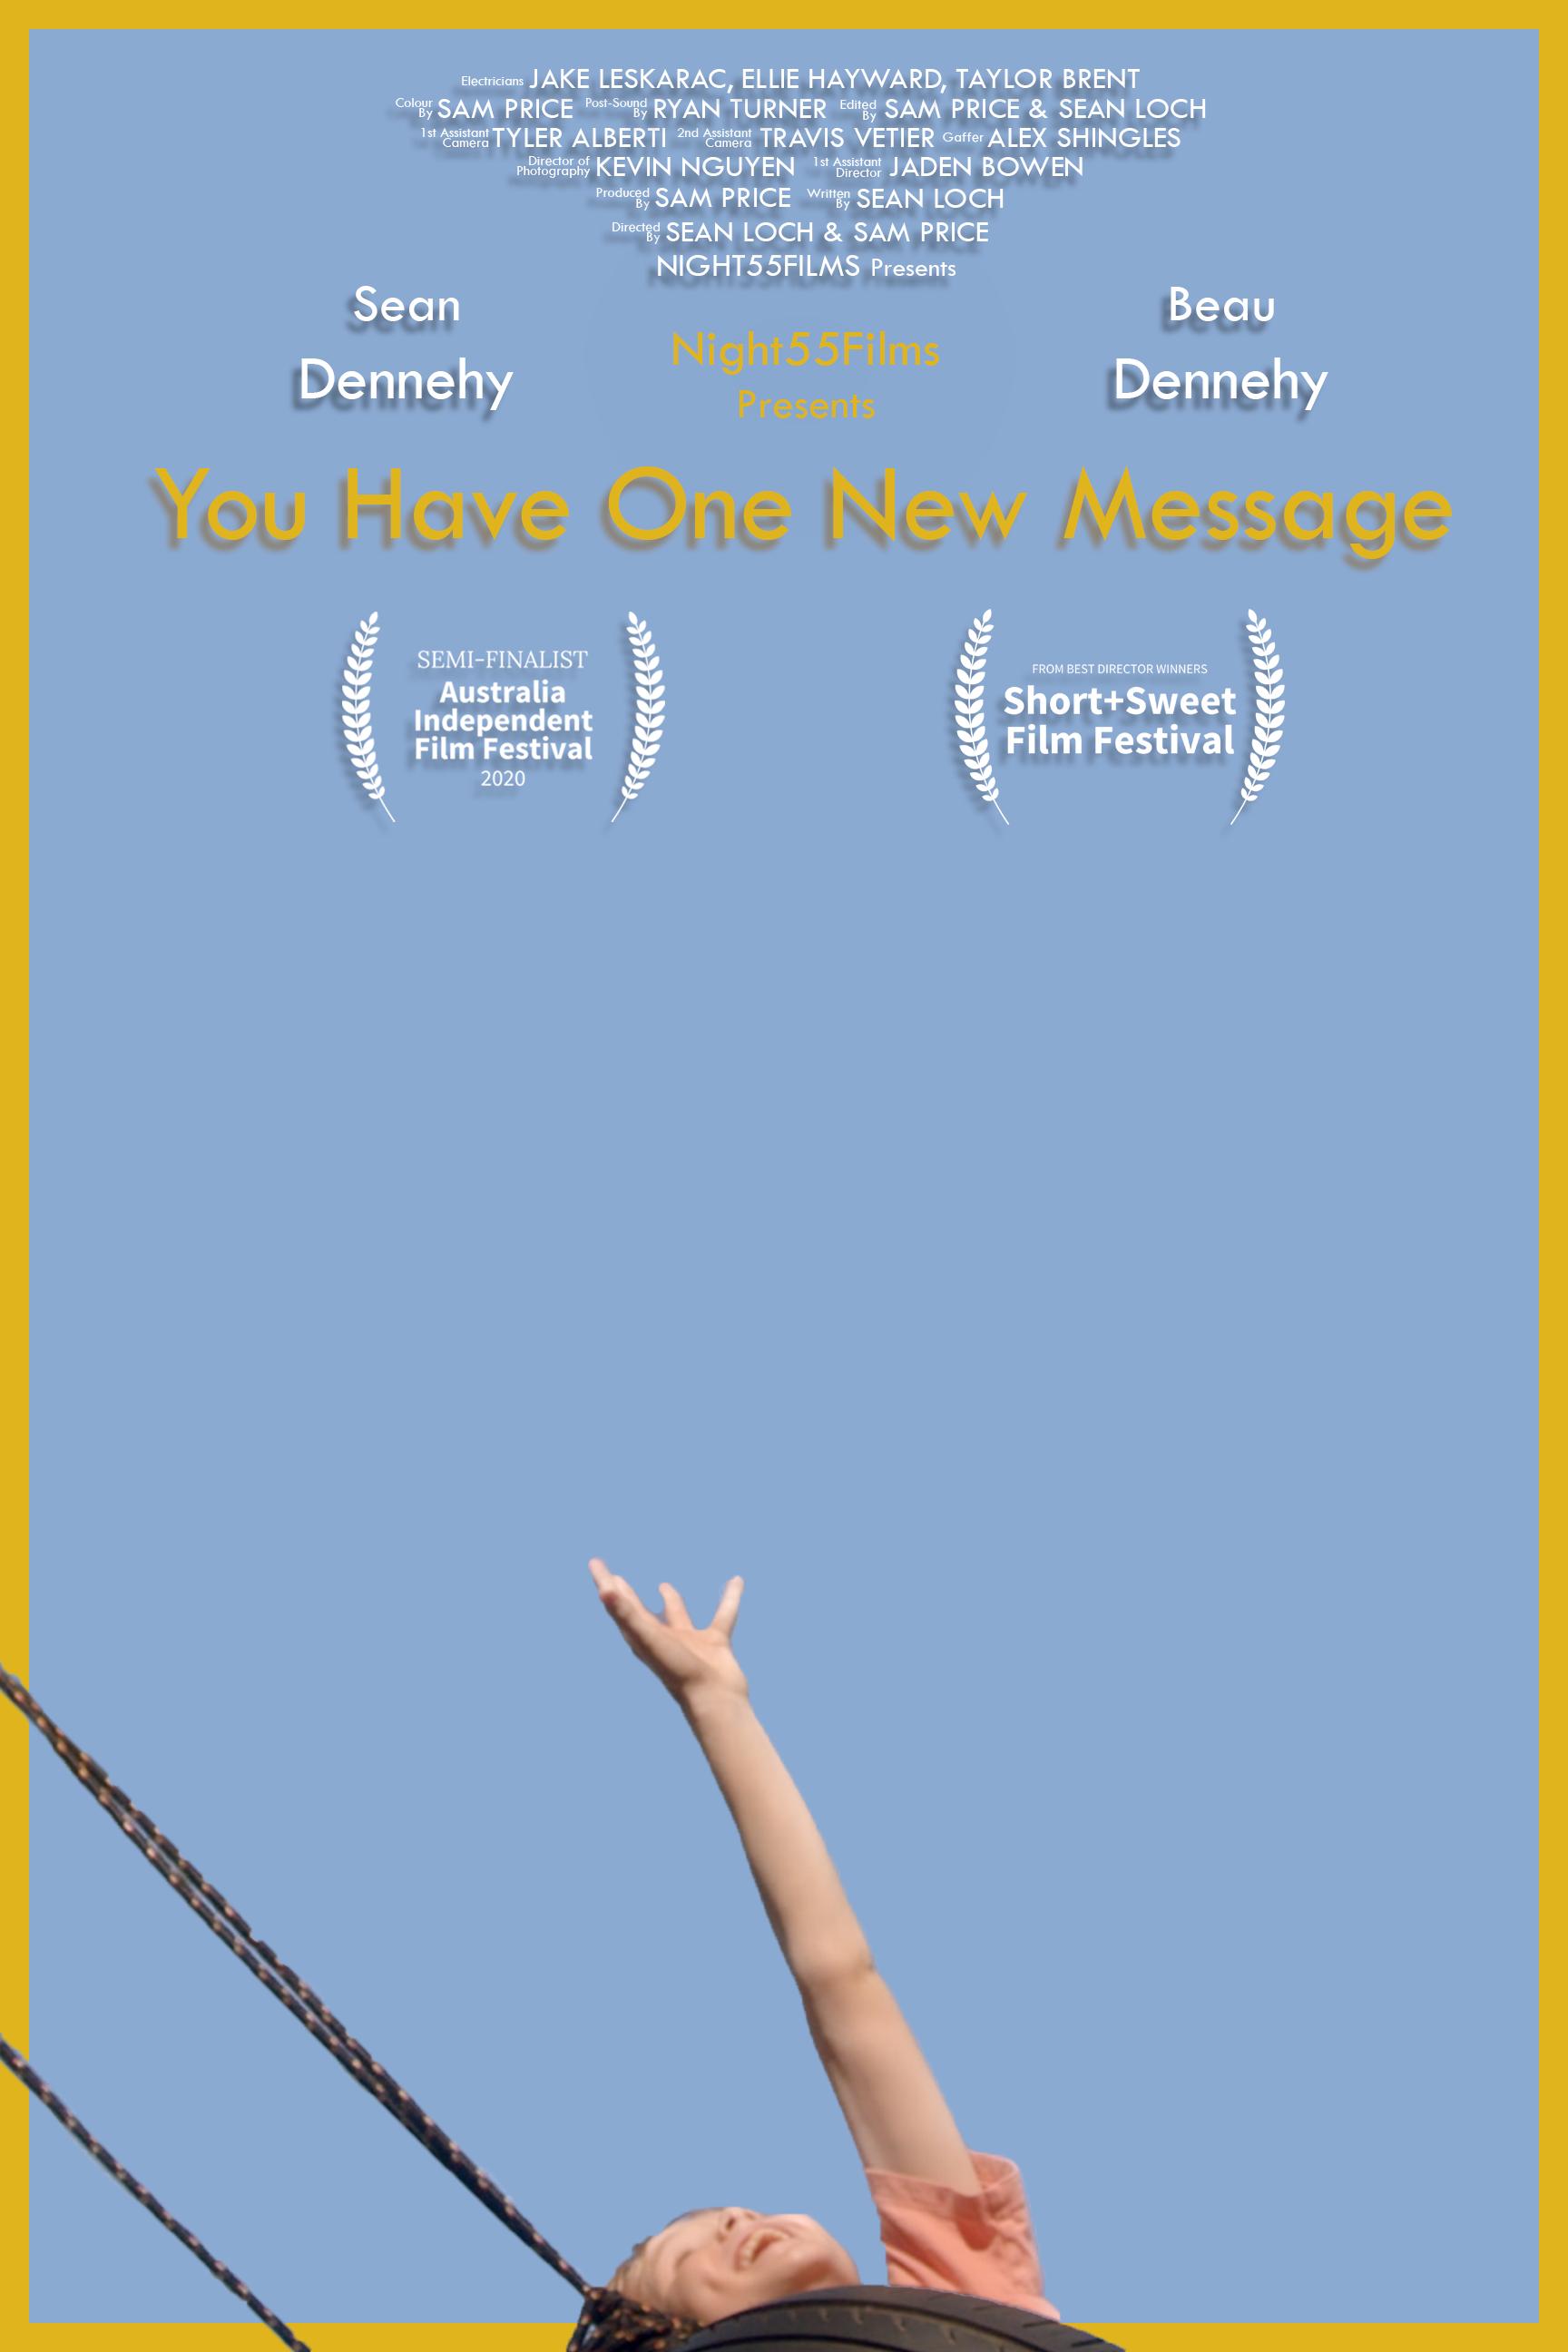 You Have One New Message (2020) постер